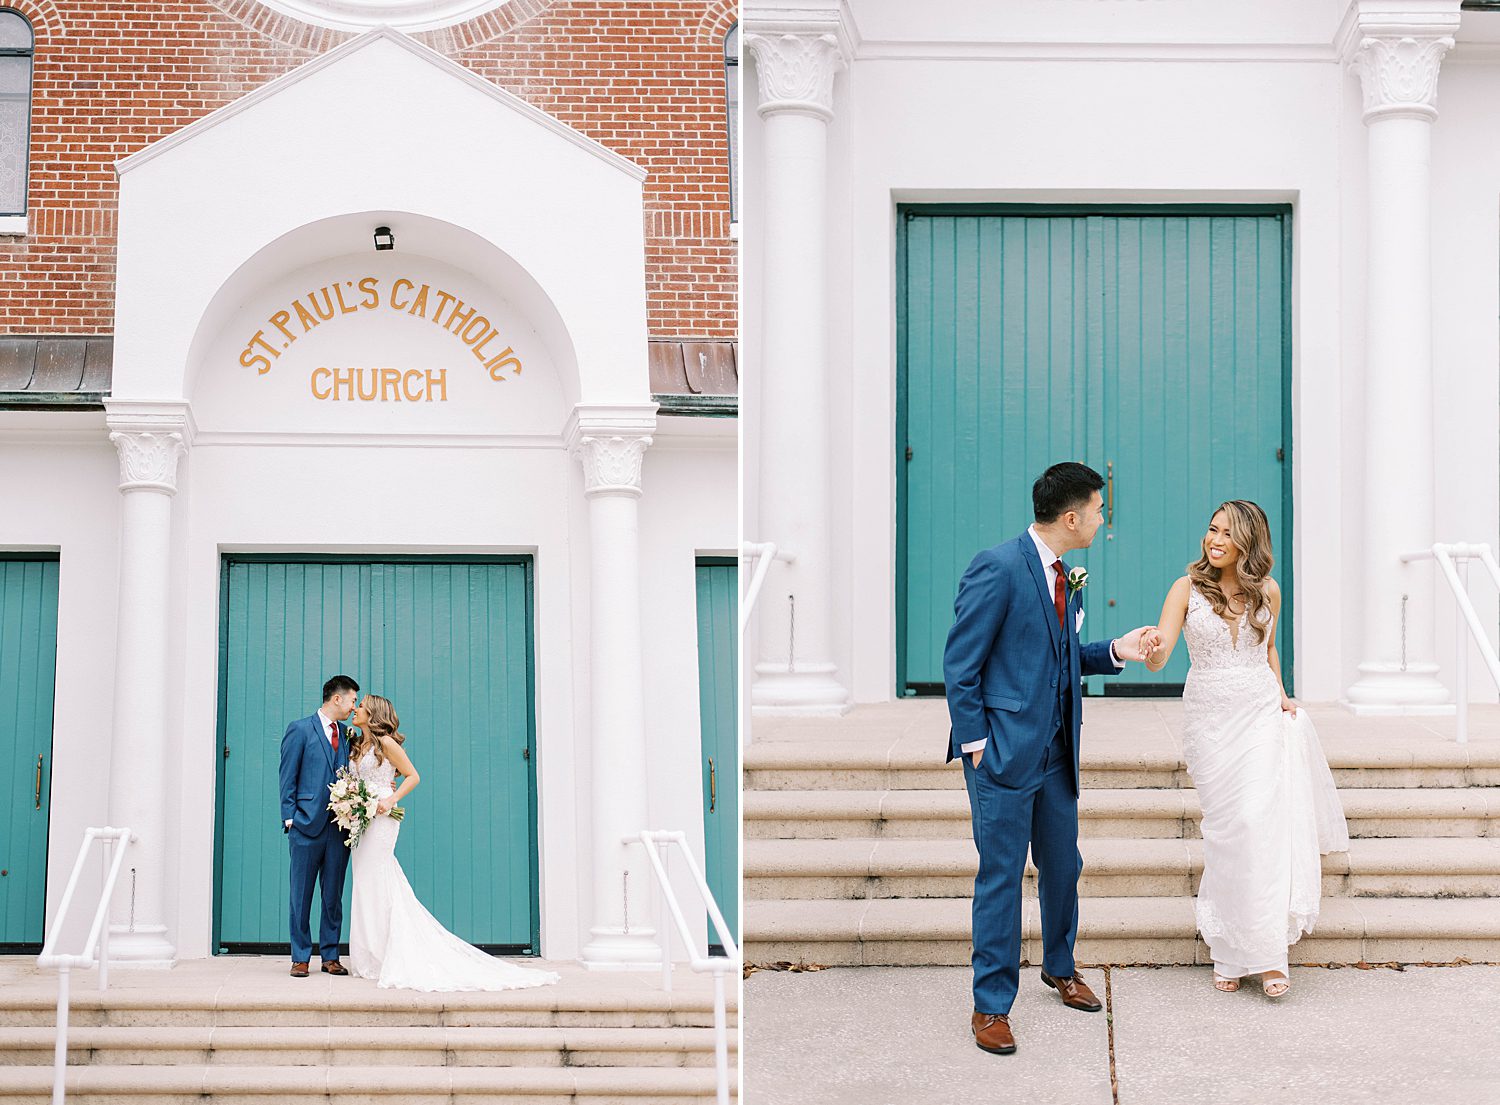 newlyweds walk down steps by teal doors at St. Paul's Catholic Church in Tampa FL